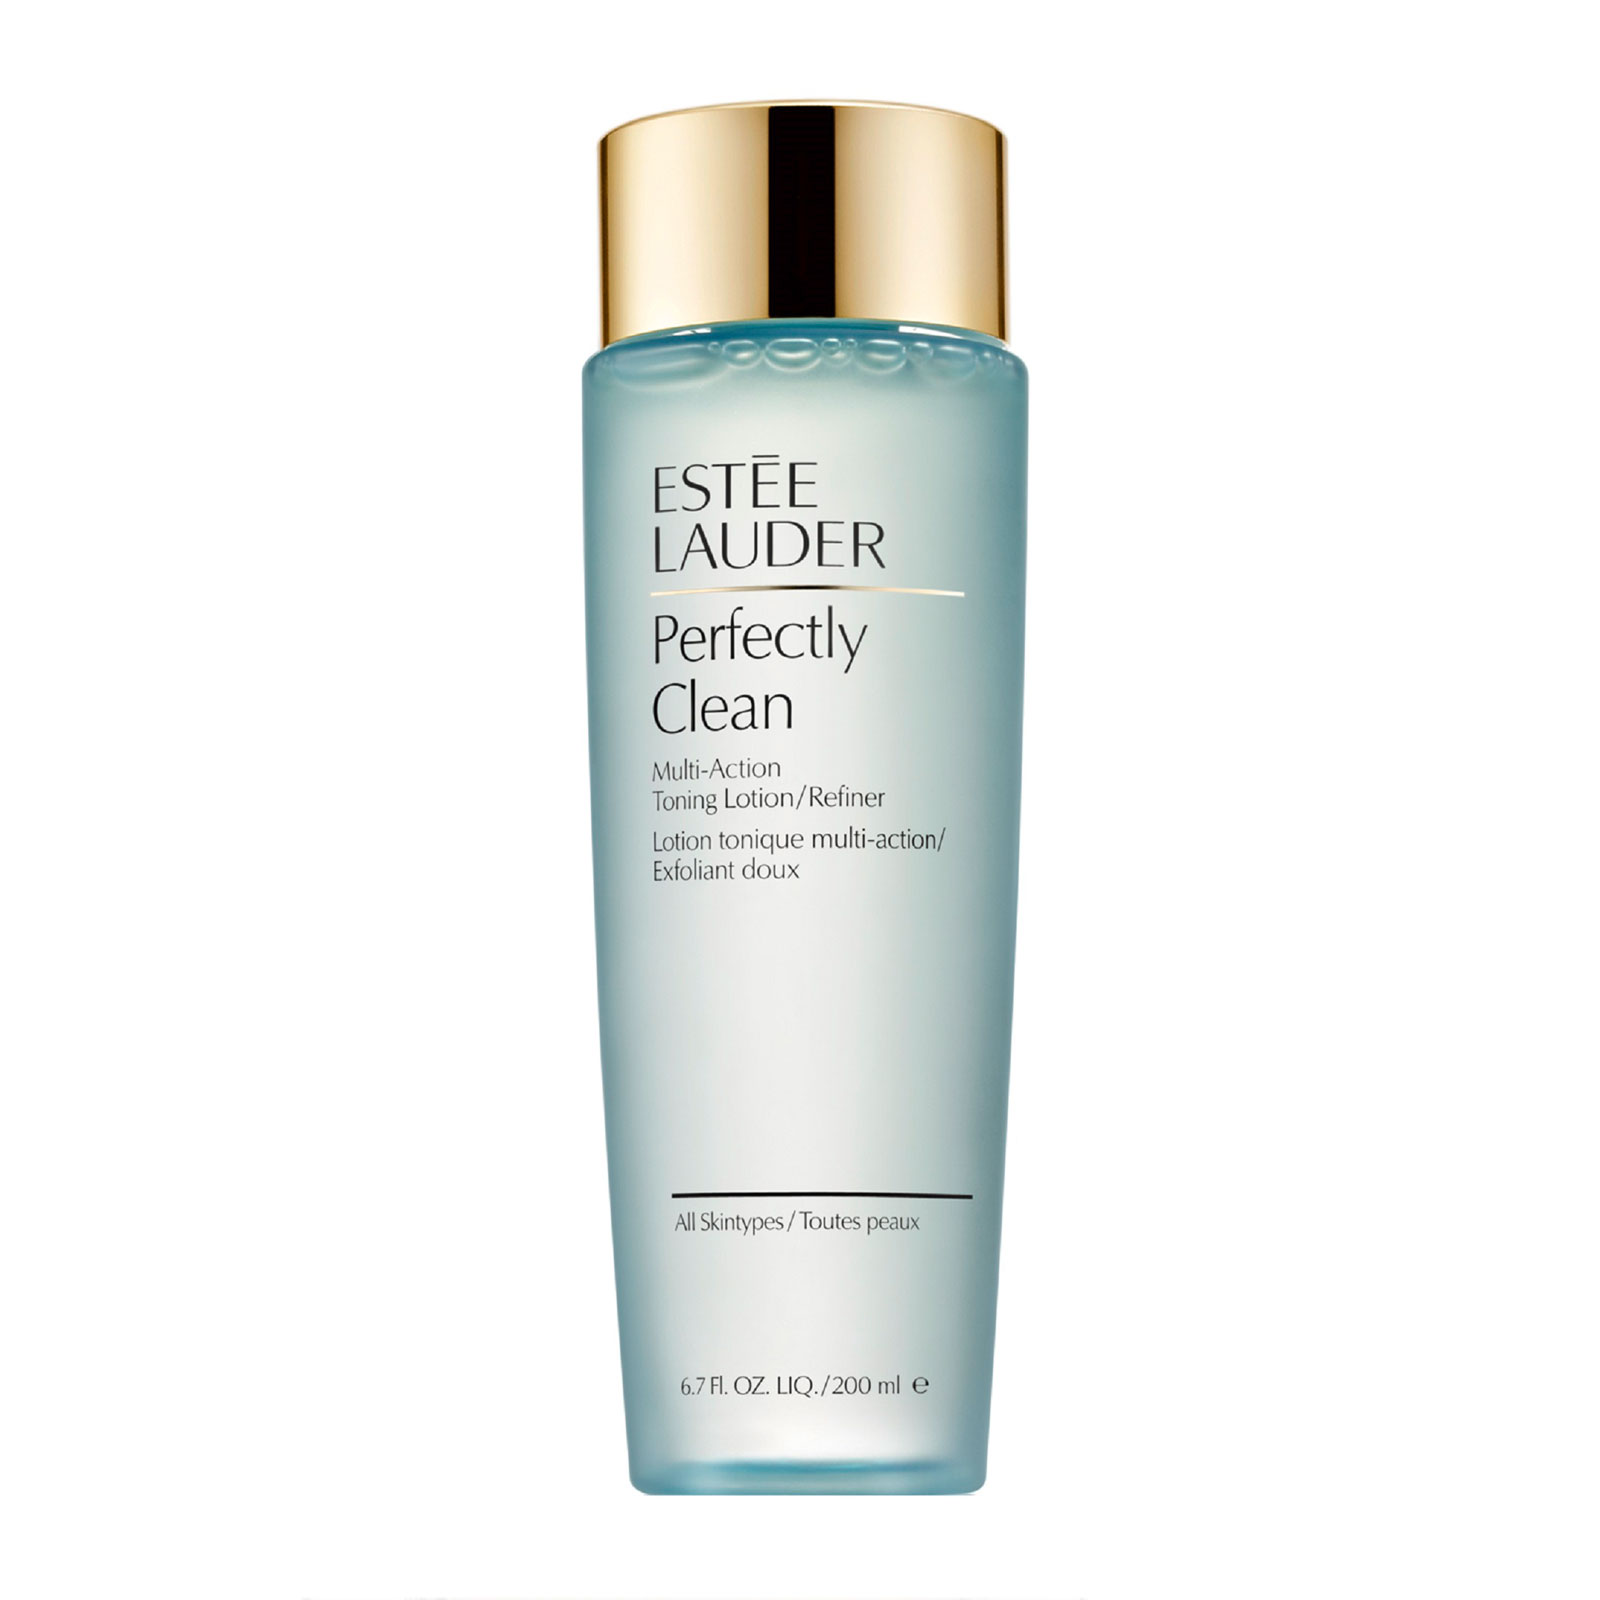 Estee Lauder Perfectly Clean Multi-Action Toning Lotion/Refiner 200Ml